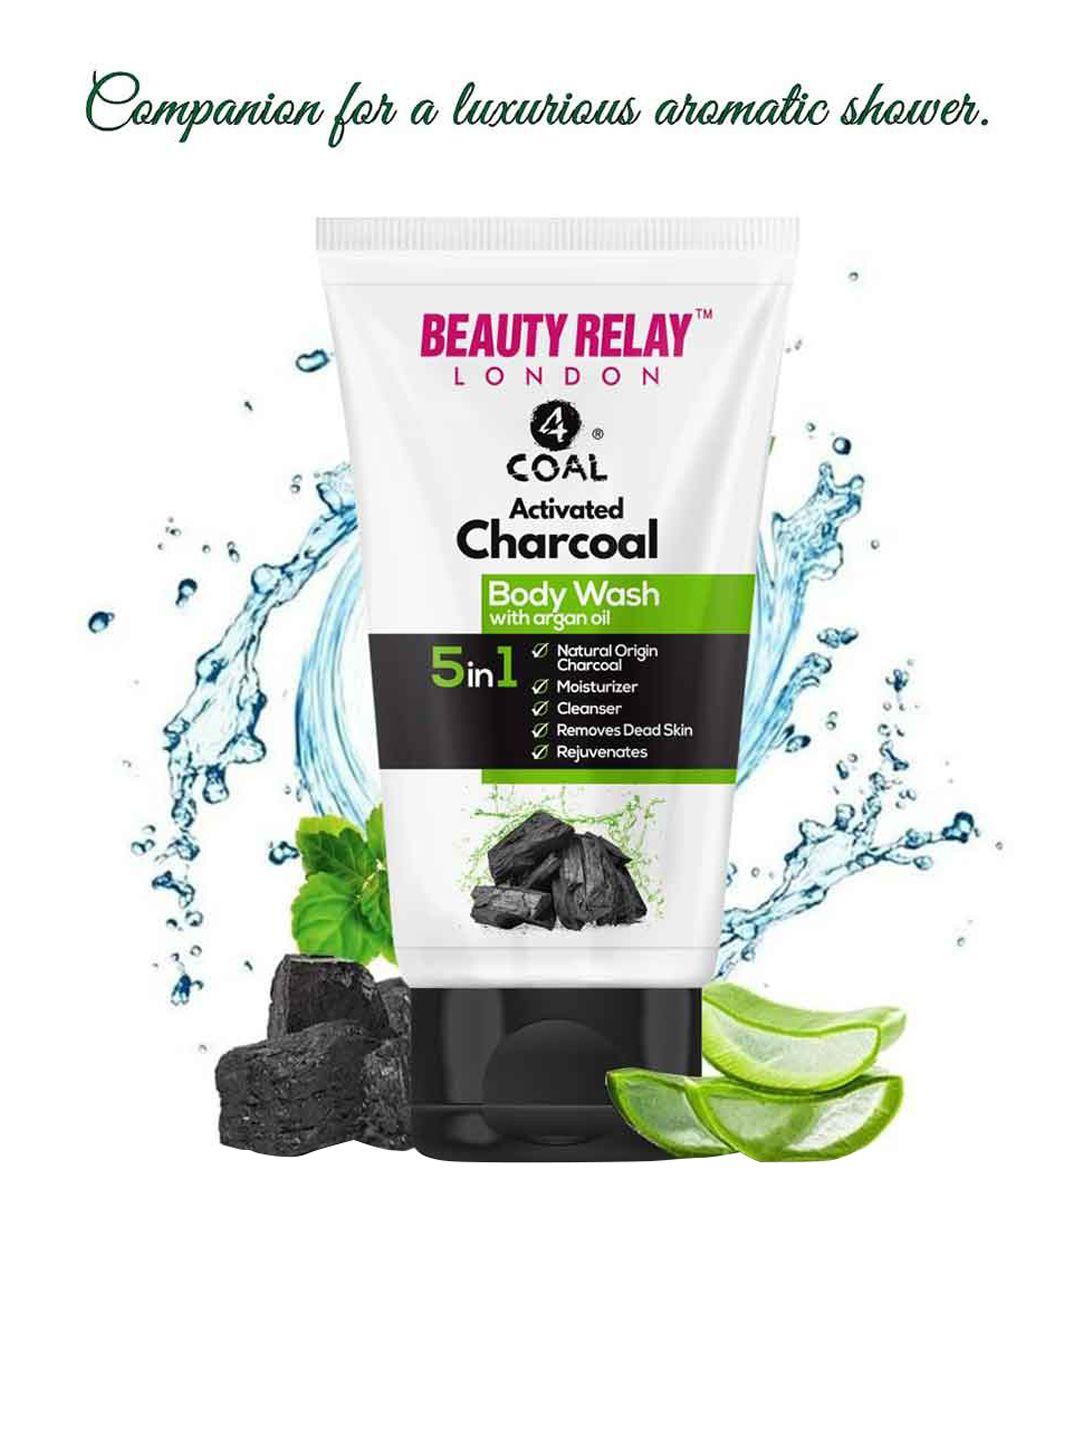 beautyrelay london unisex activated charcoal 5 in 1 argan oil body wash 200ml